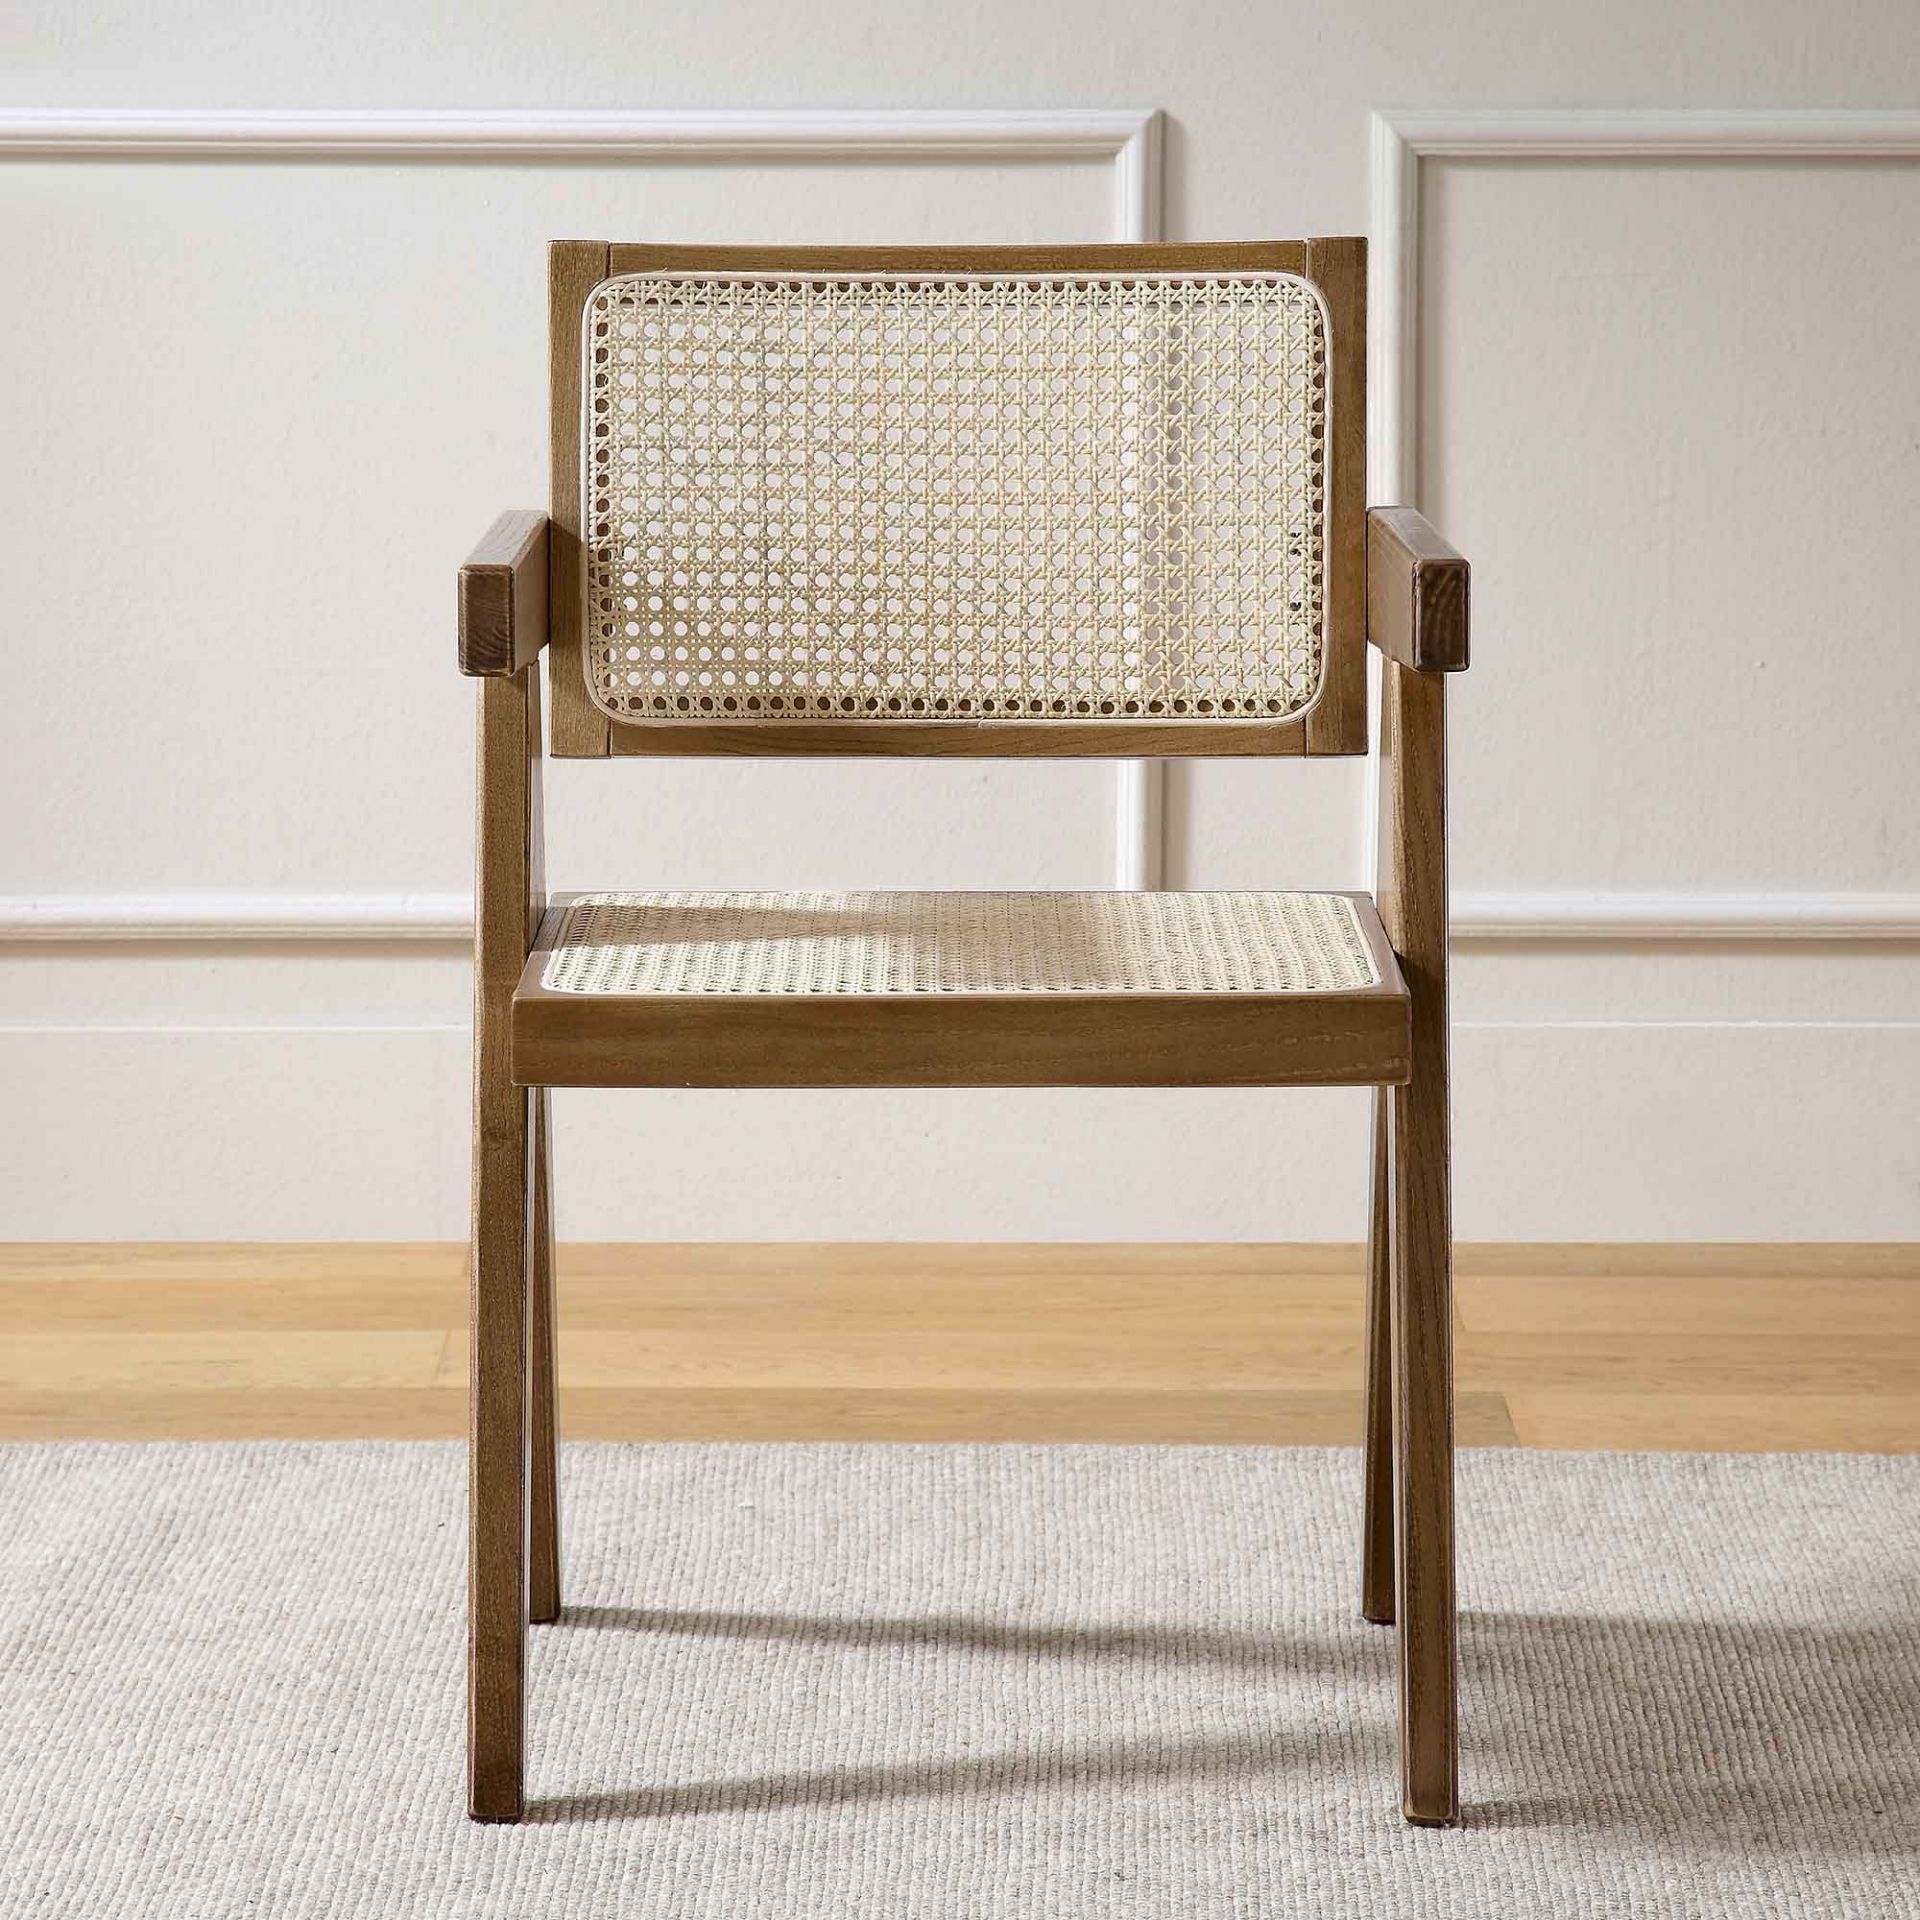 Jeanne Light Walnut Cane Rattan Solid Beech Wood Dining Chair. - R13.7. The cane rattan in the chair